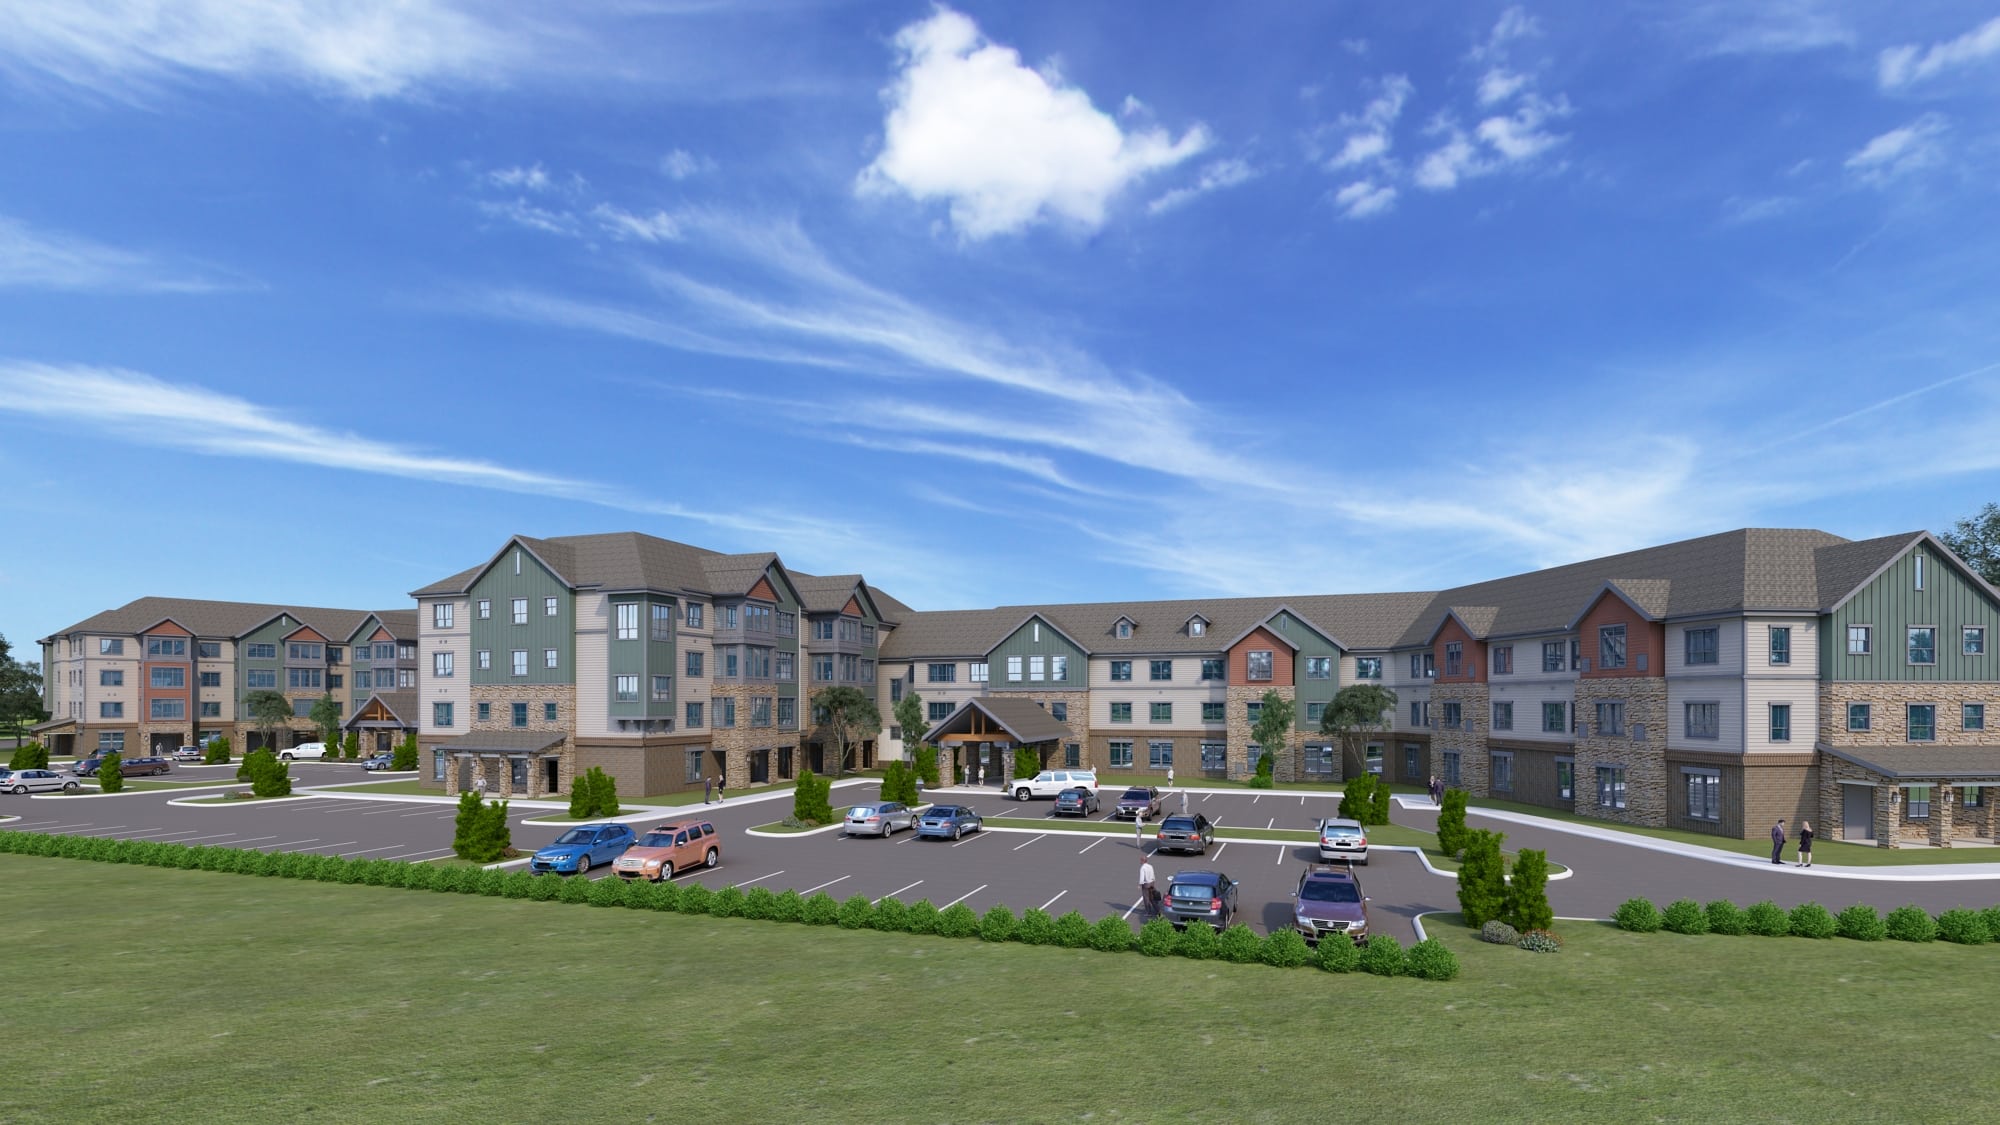 A rendering of an apartment complex with a parking lot.